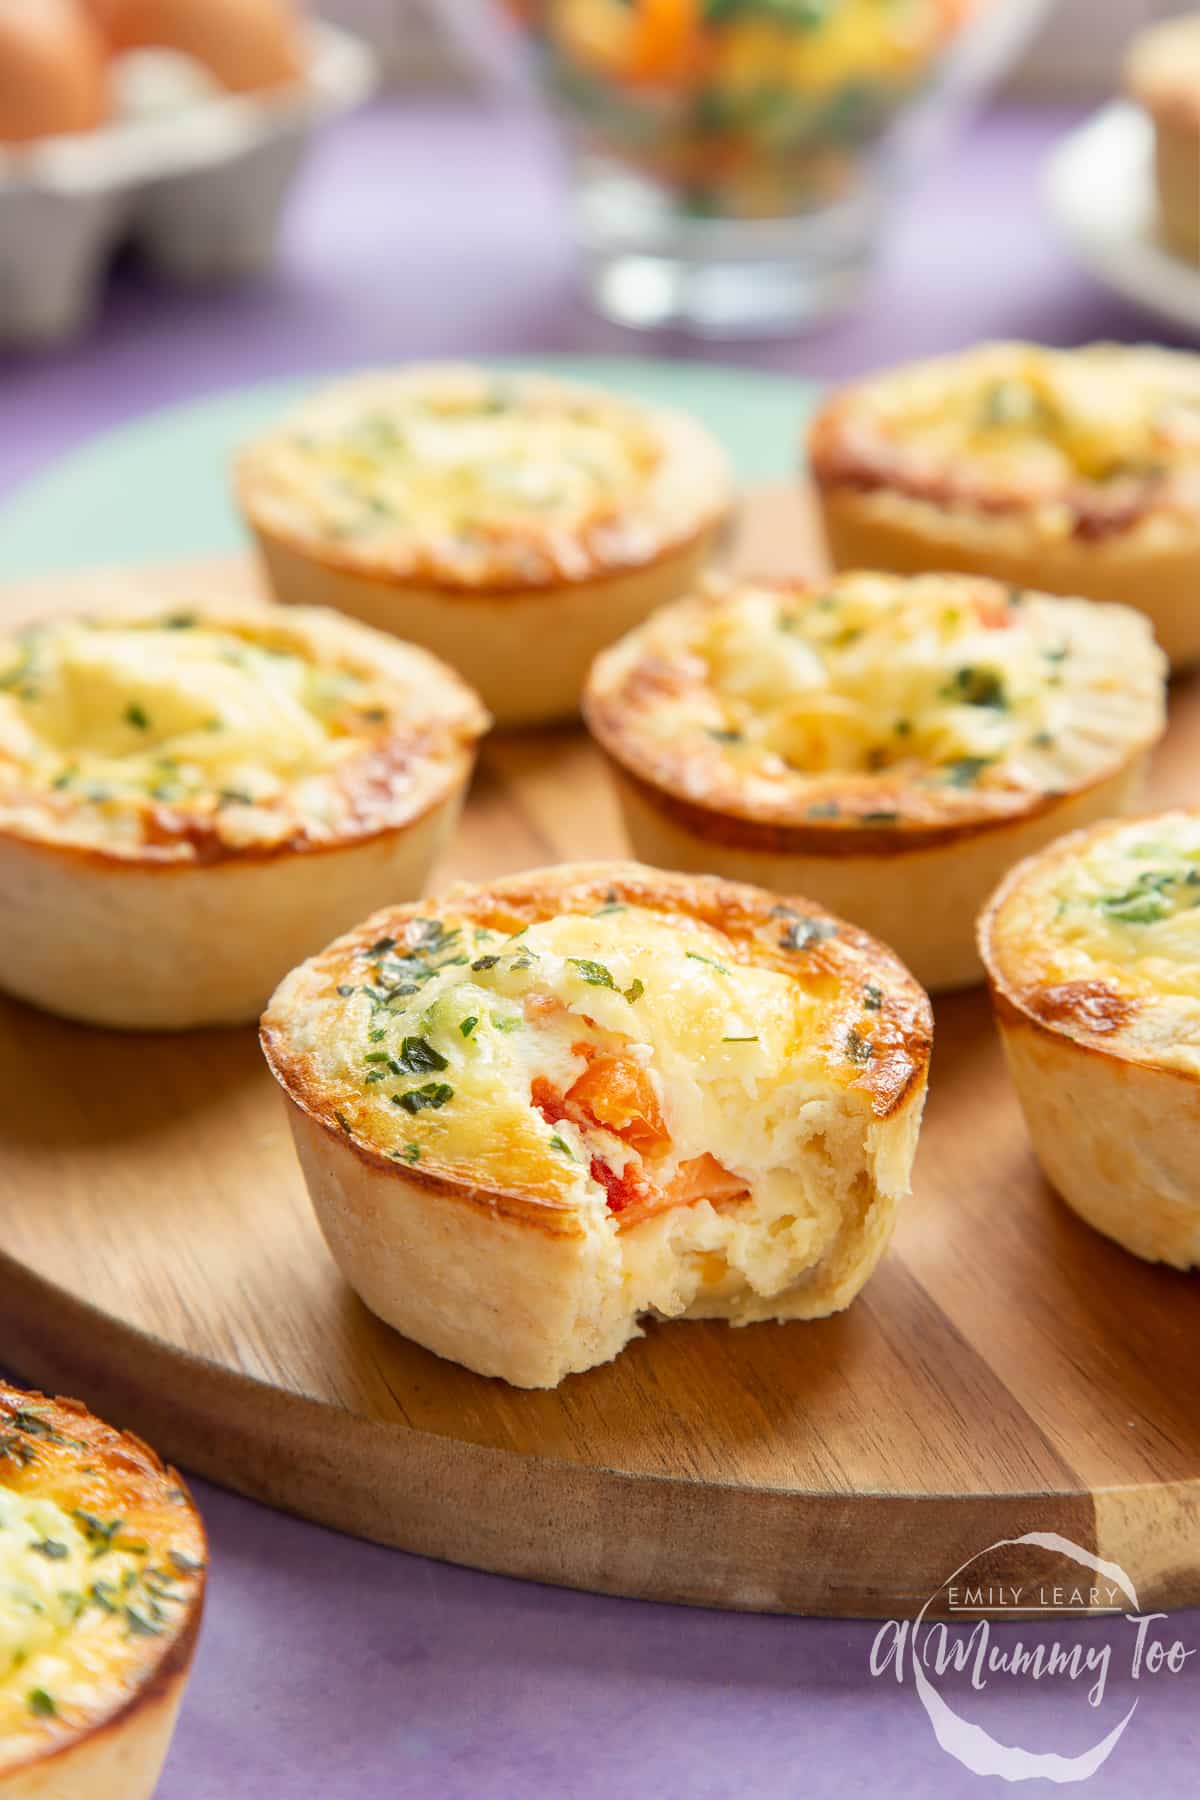 A mini vegetable quiche with a bite out of it, revealing the vegetables inside. More are arranged on a wooden board in the background.